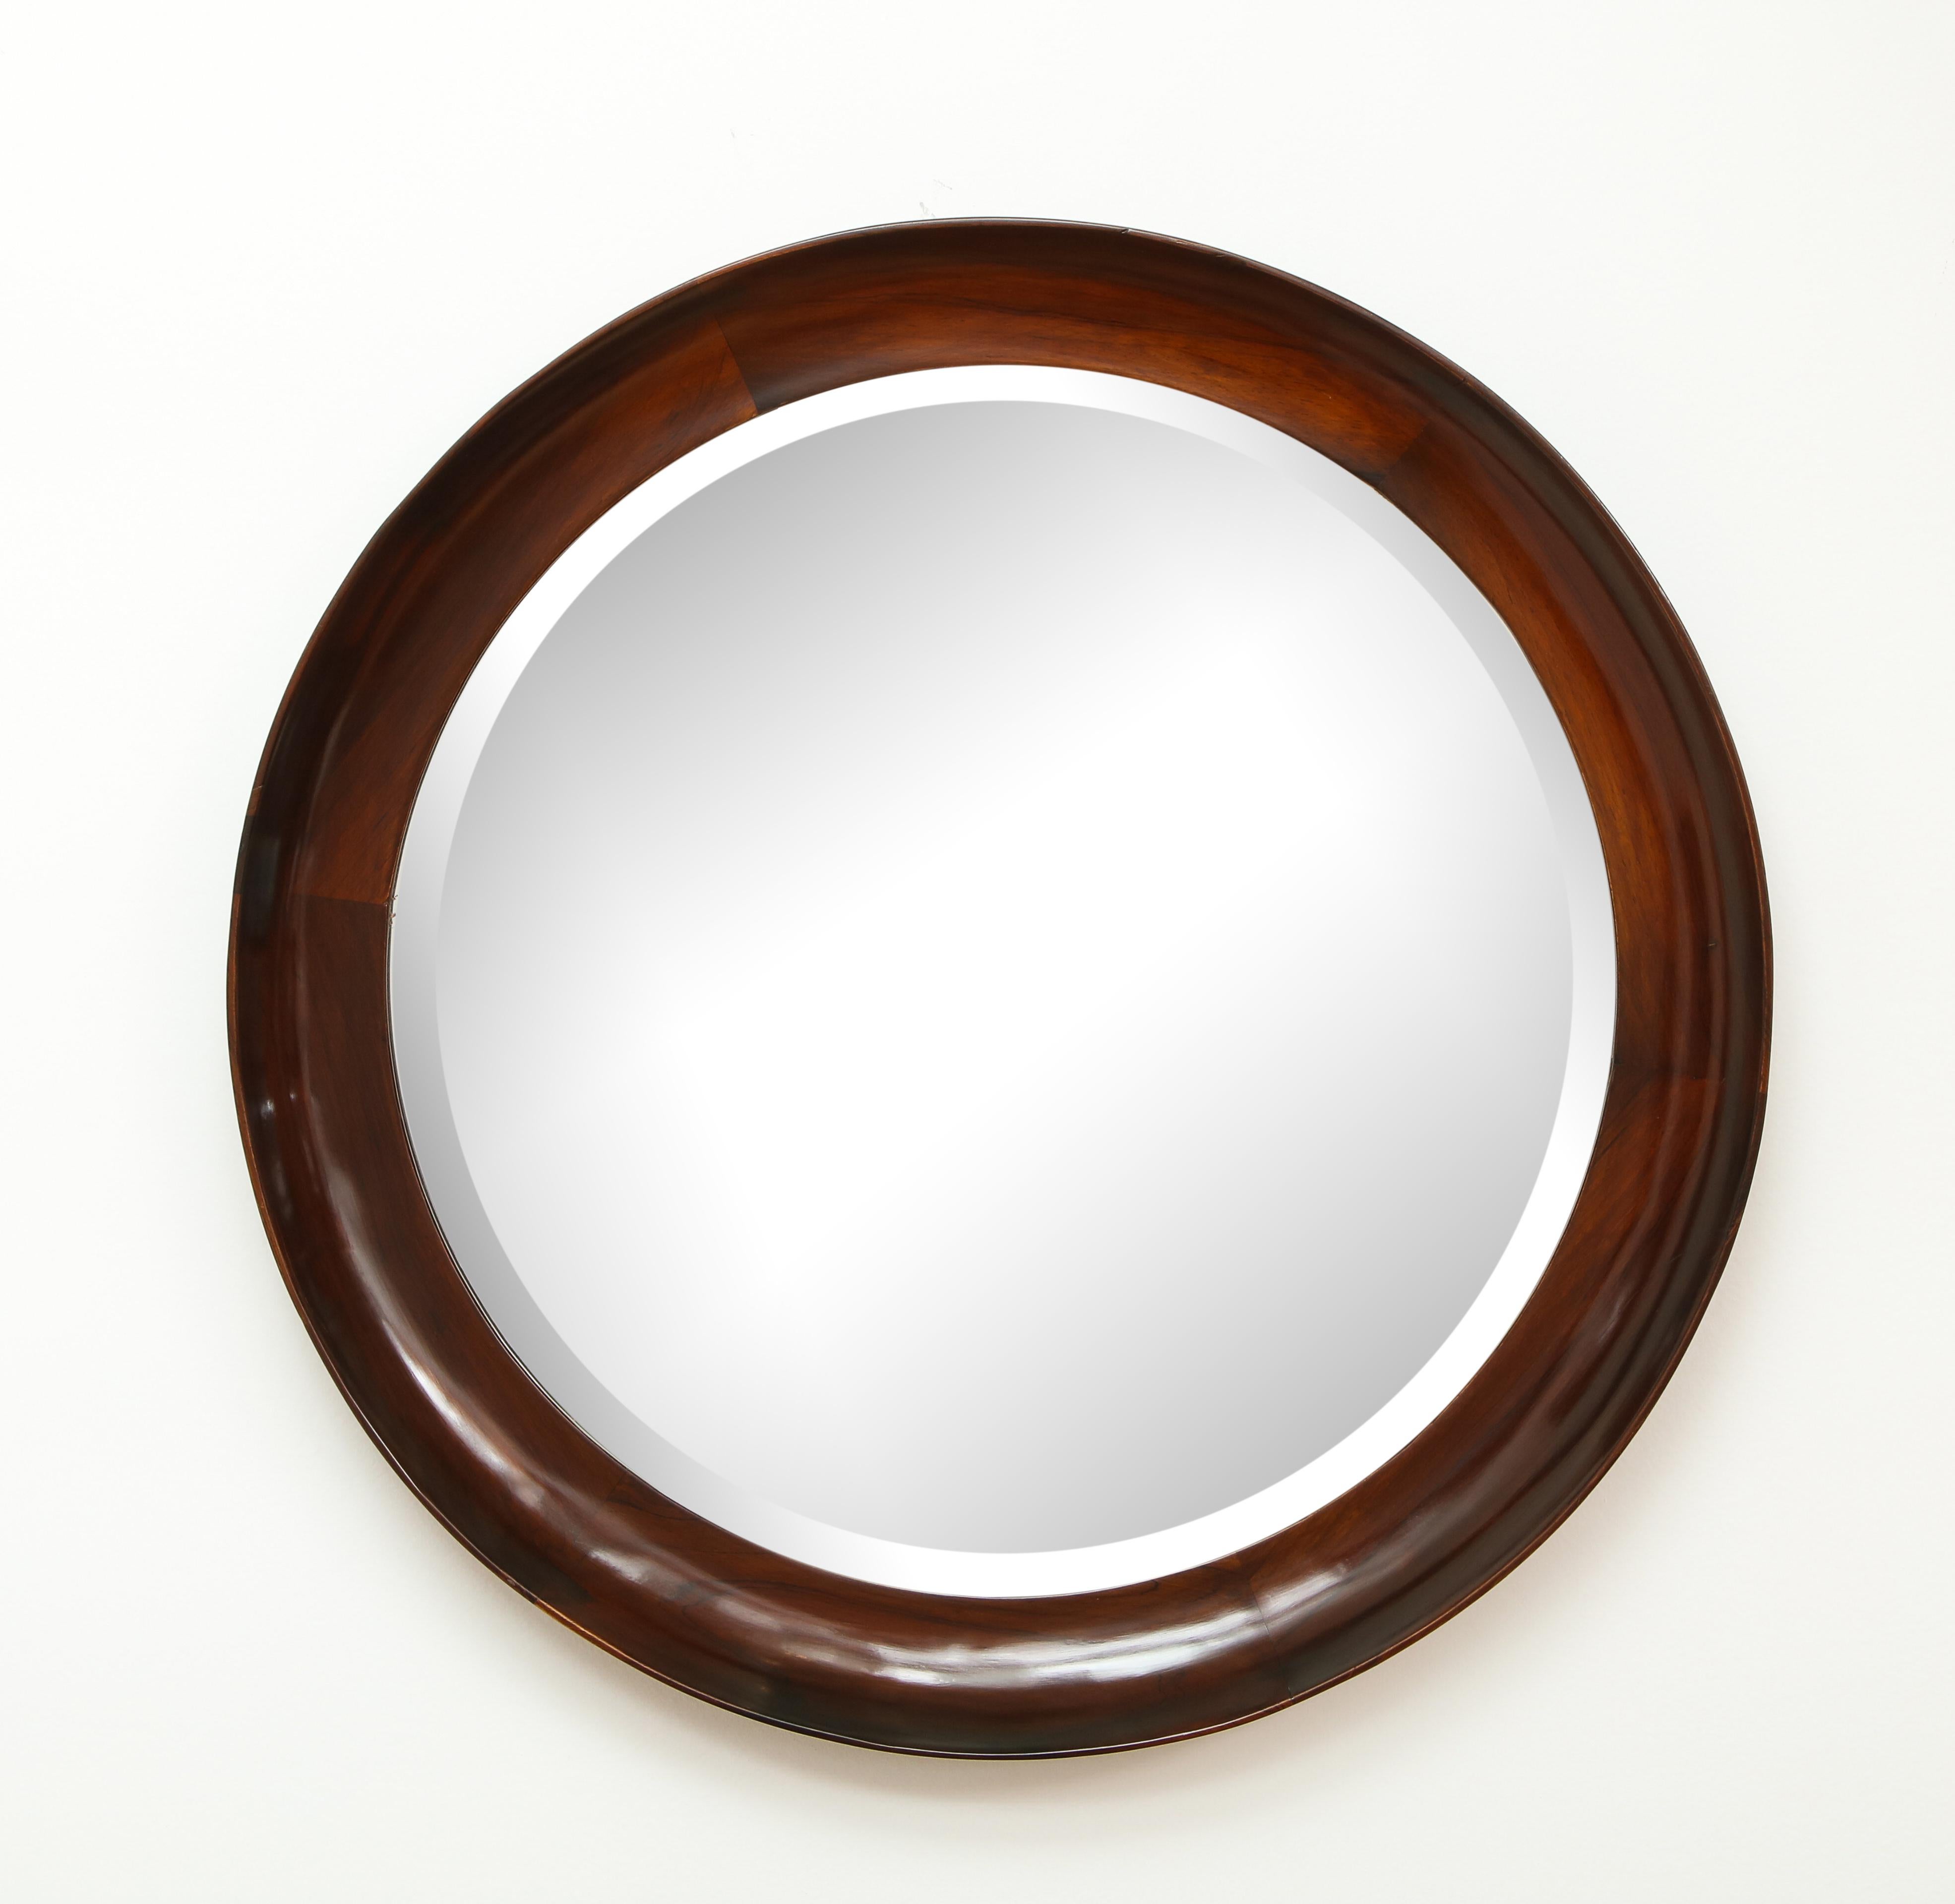 Mid-Century Modern Round Wall Mirror in Wood Frame by OCA, Brazil, 1960s

This vintage wall mirror was manufactured circa 1960s in Brazil. It features an elegant round frame in solid wood, finished in natural varnish maintaining the wood's real